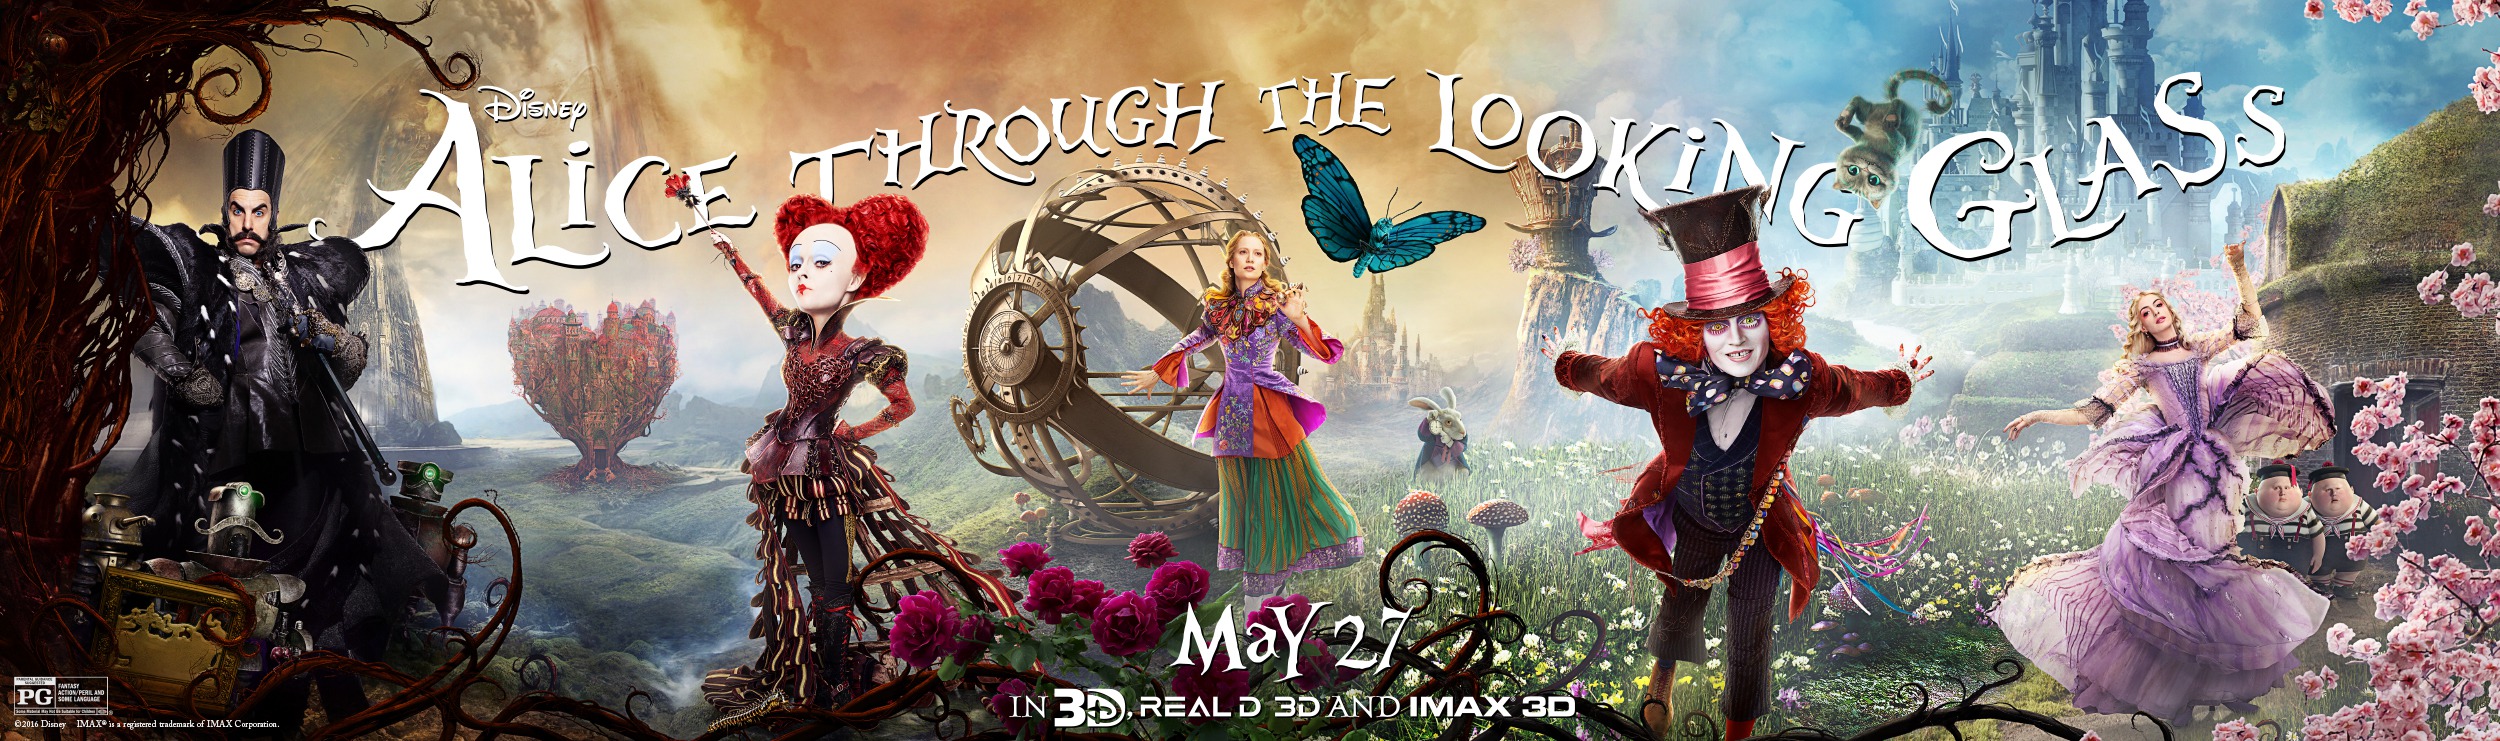 Mega Sized Movie Poster Image for Alice Through the Looking Glass (#20 of 24)